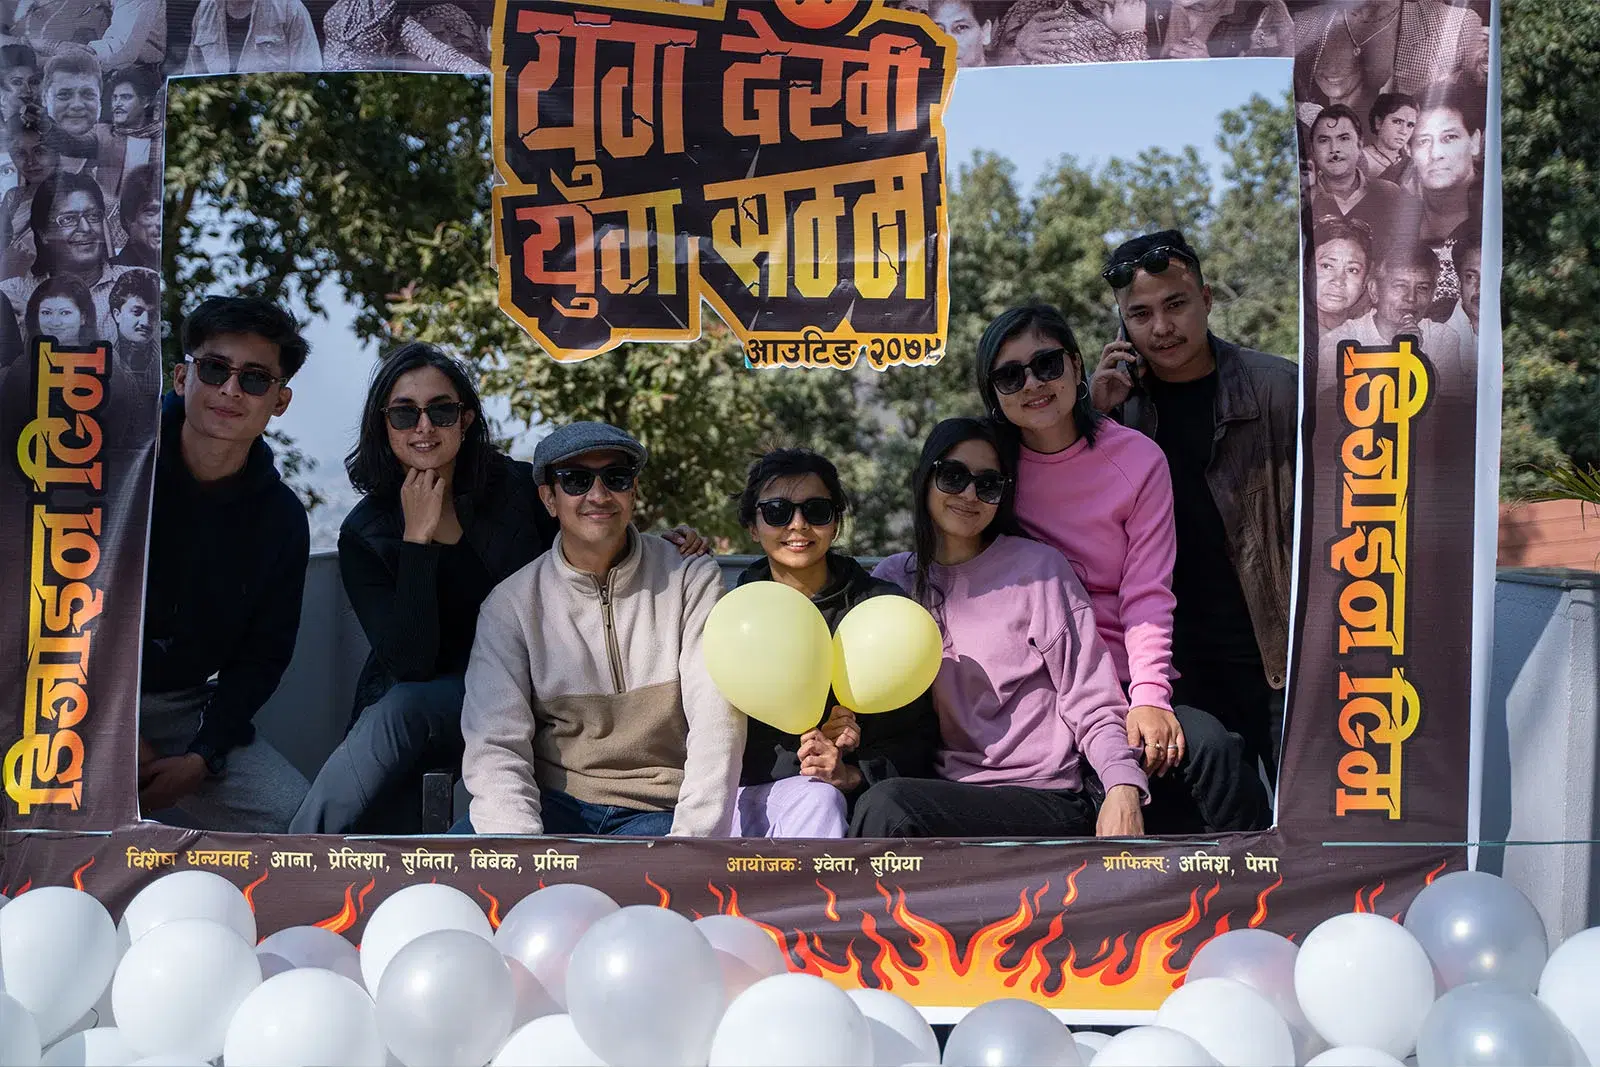 A group picture of seven people posing in a Nepali movie-themed photo booth.